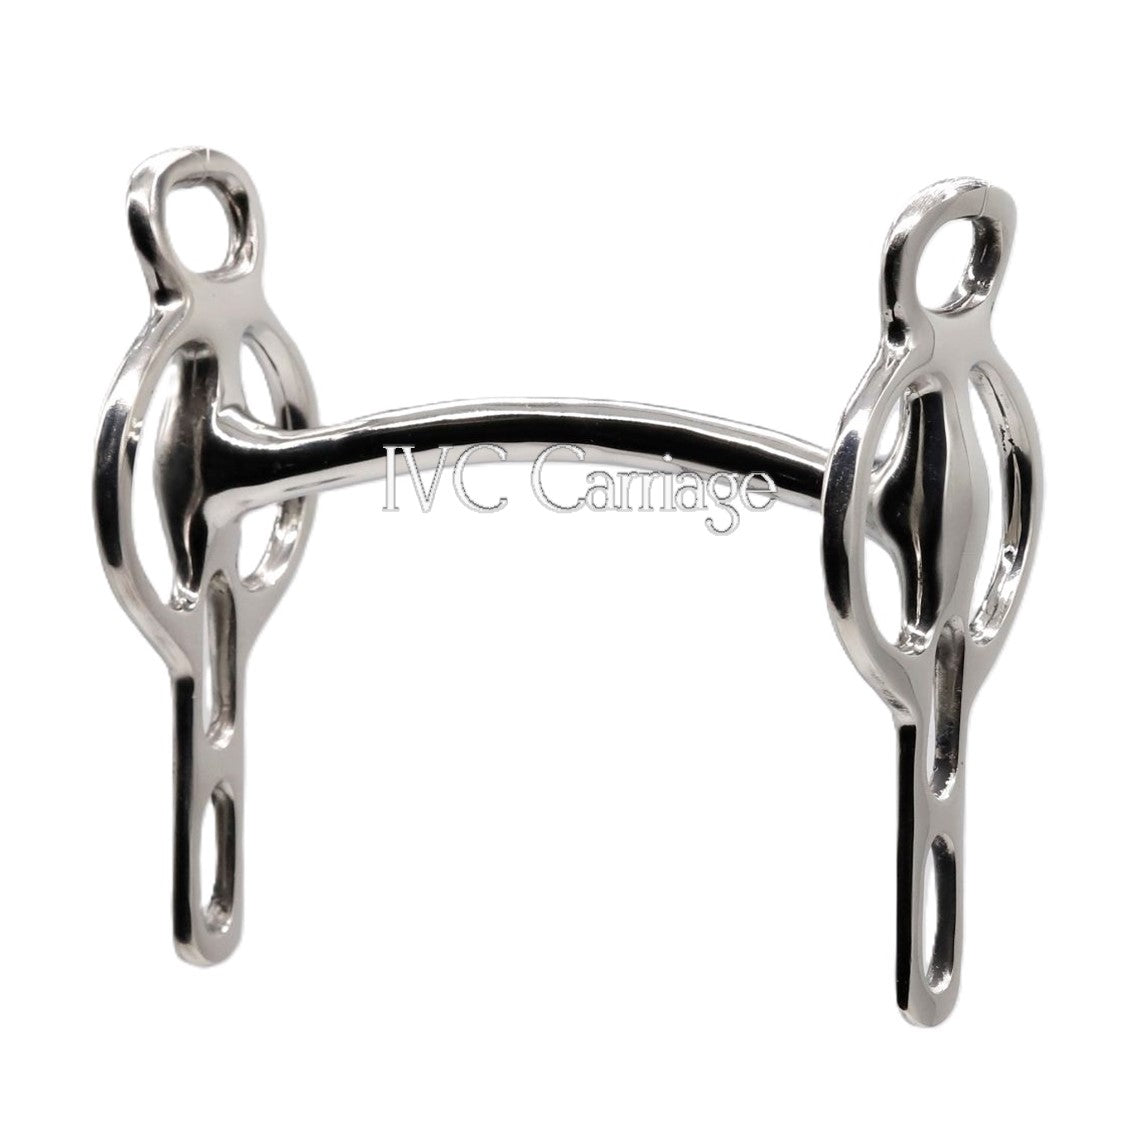 Miniature Pony Arch Liverpool Fixed Cheek Bit | IVC Carriage